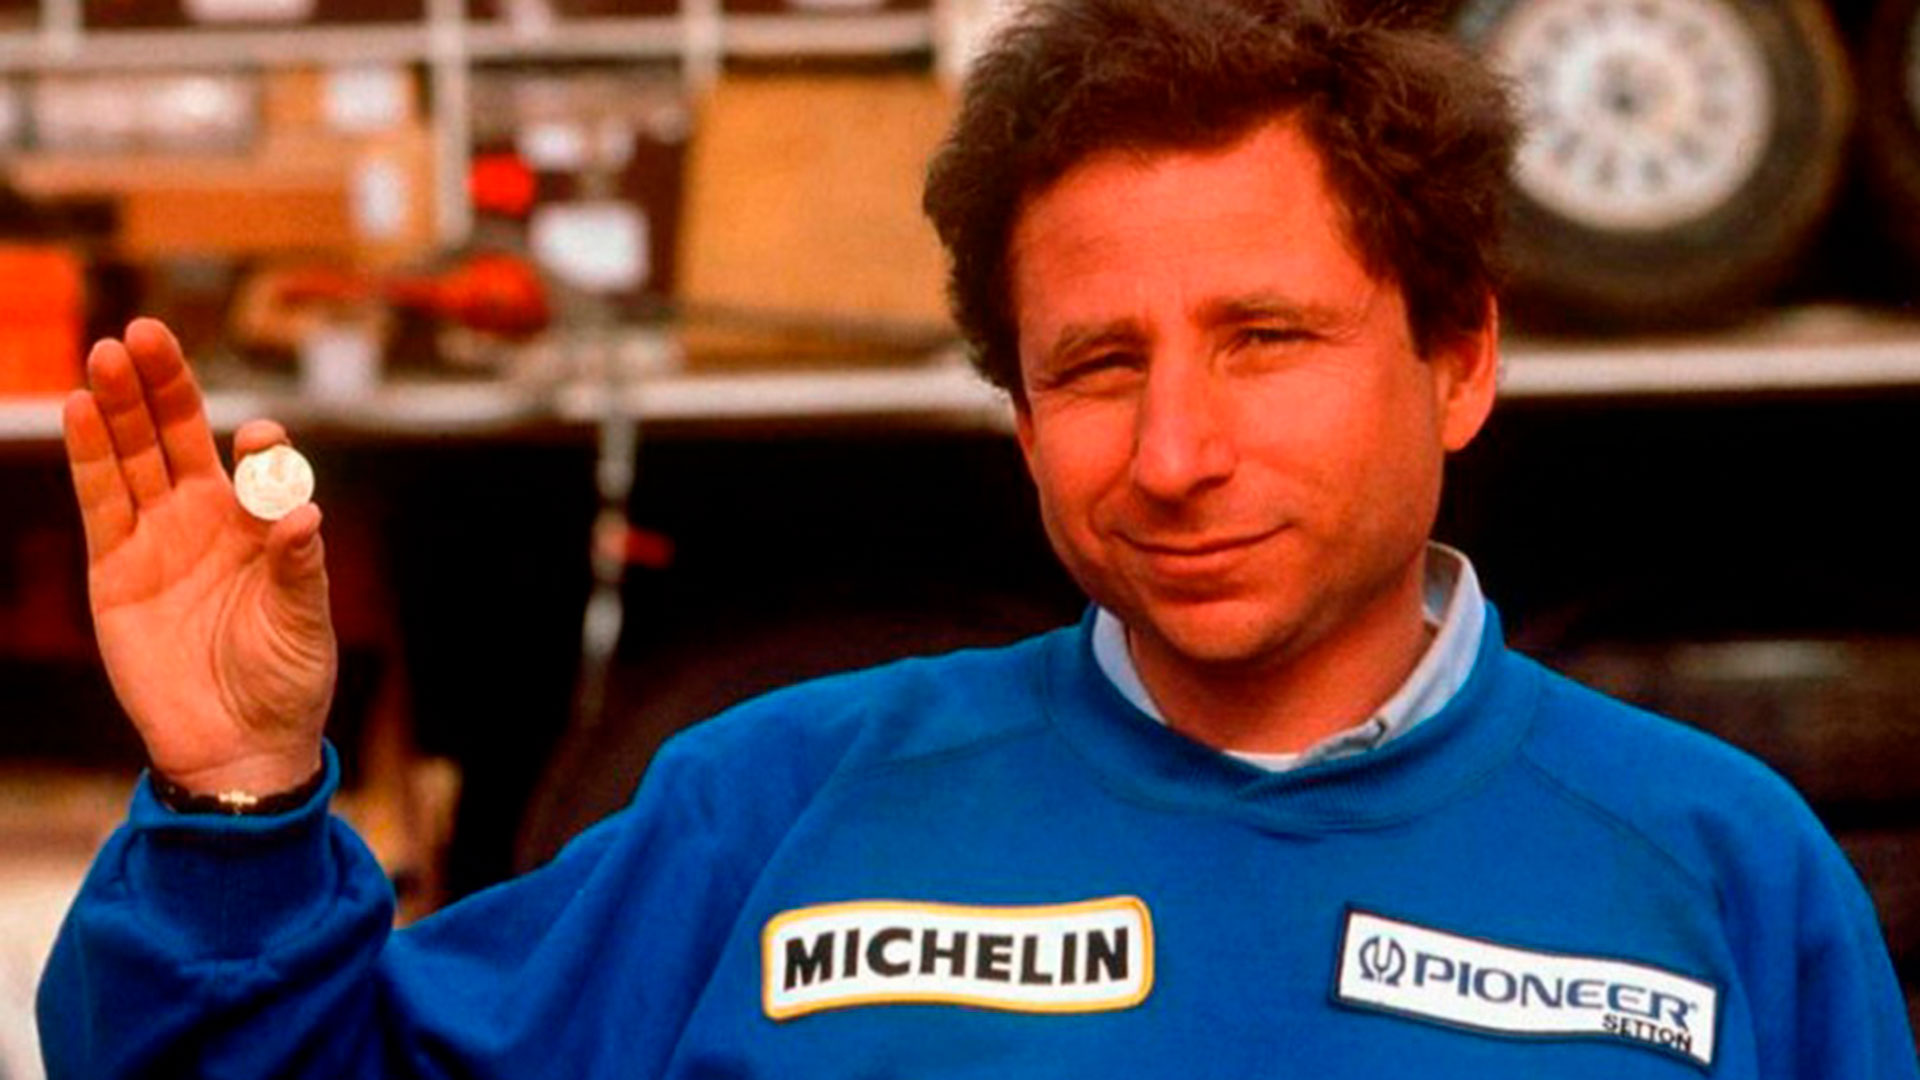 Jean Todt is one of the most famous faces in motor sports.